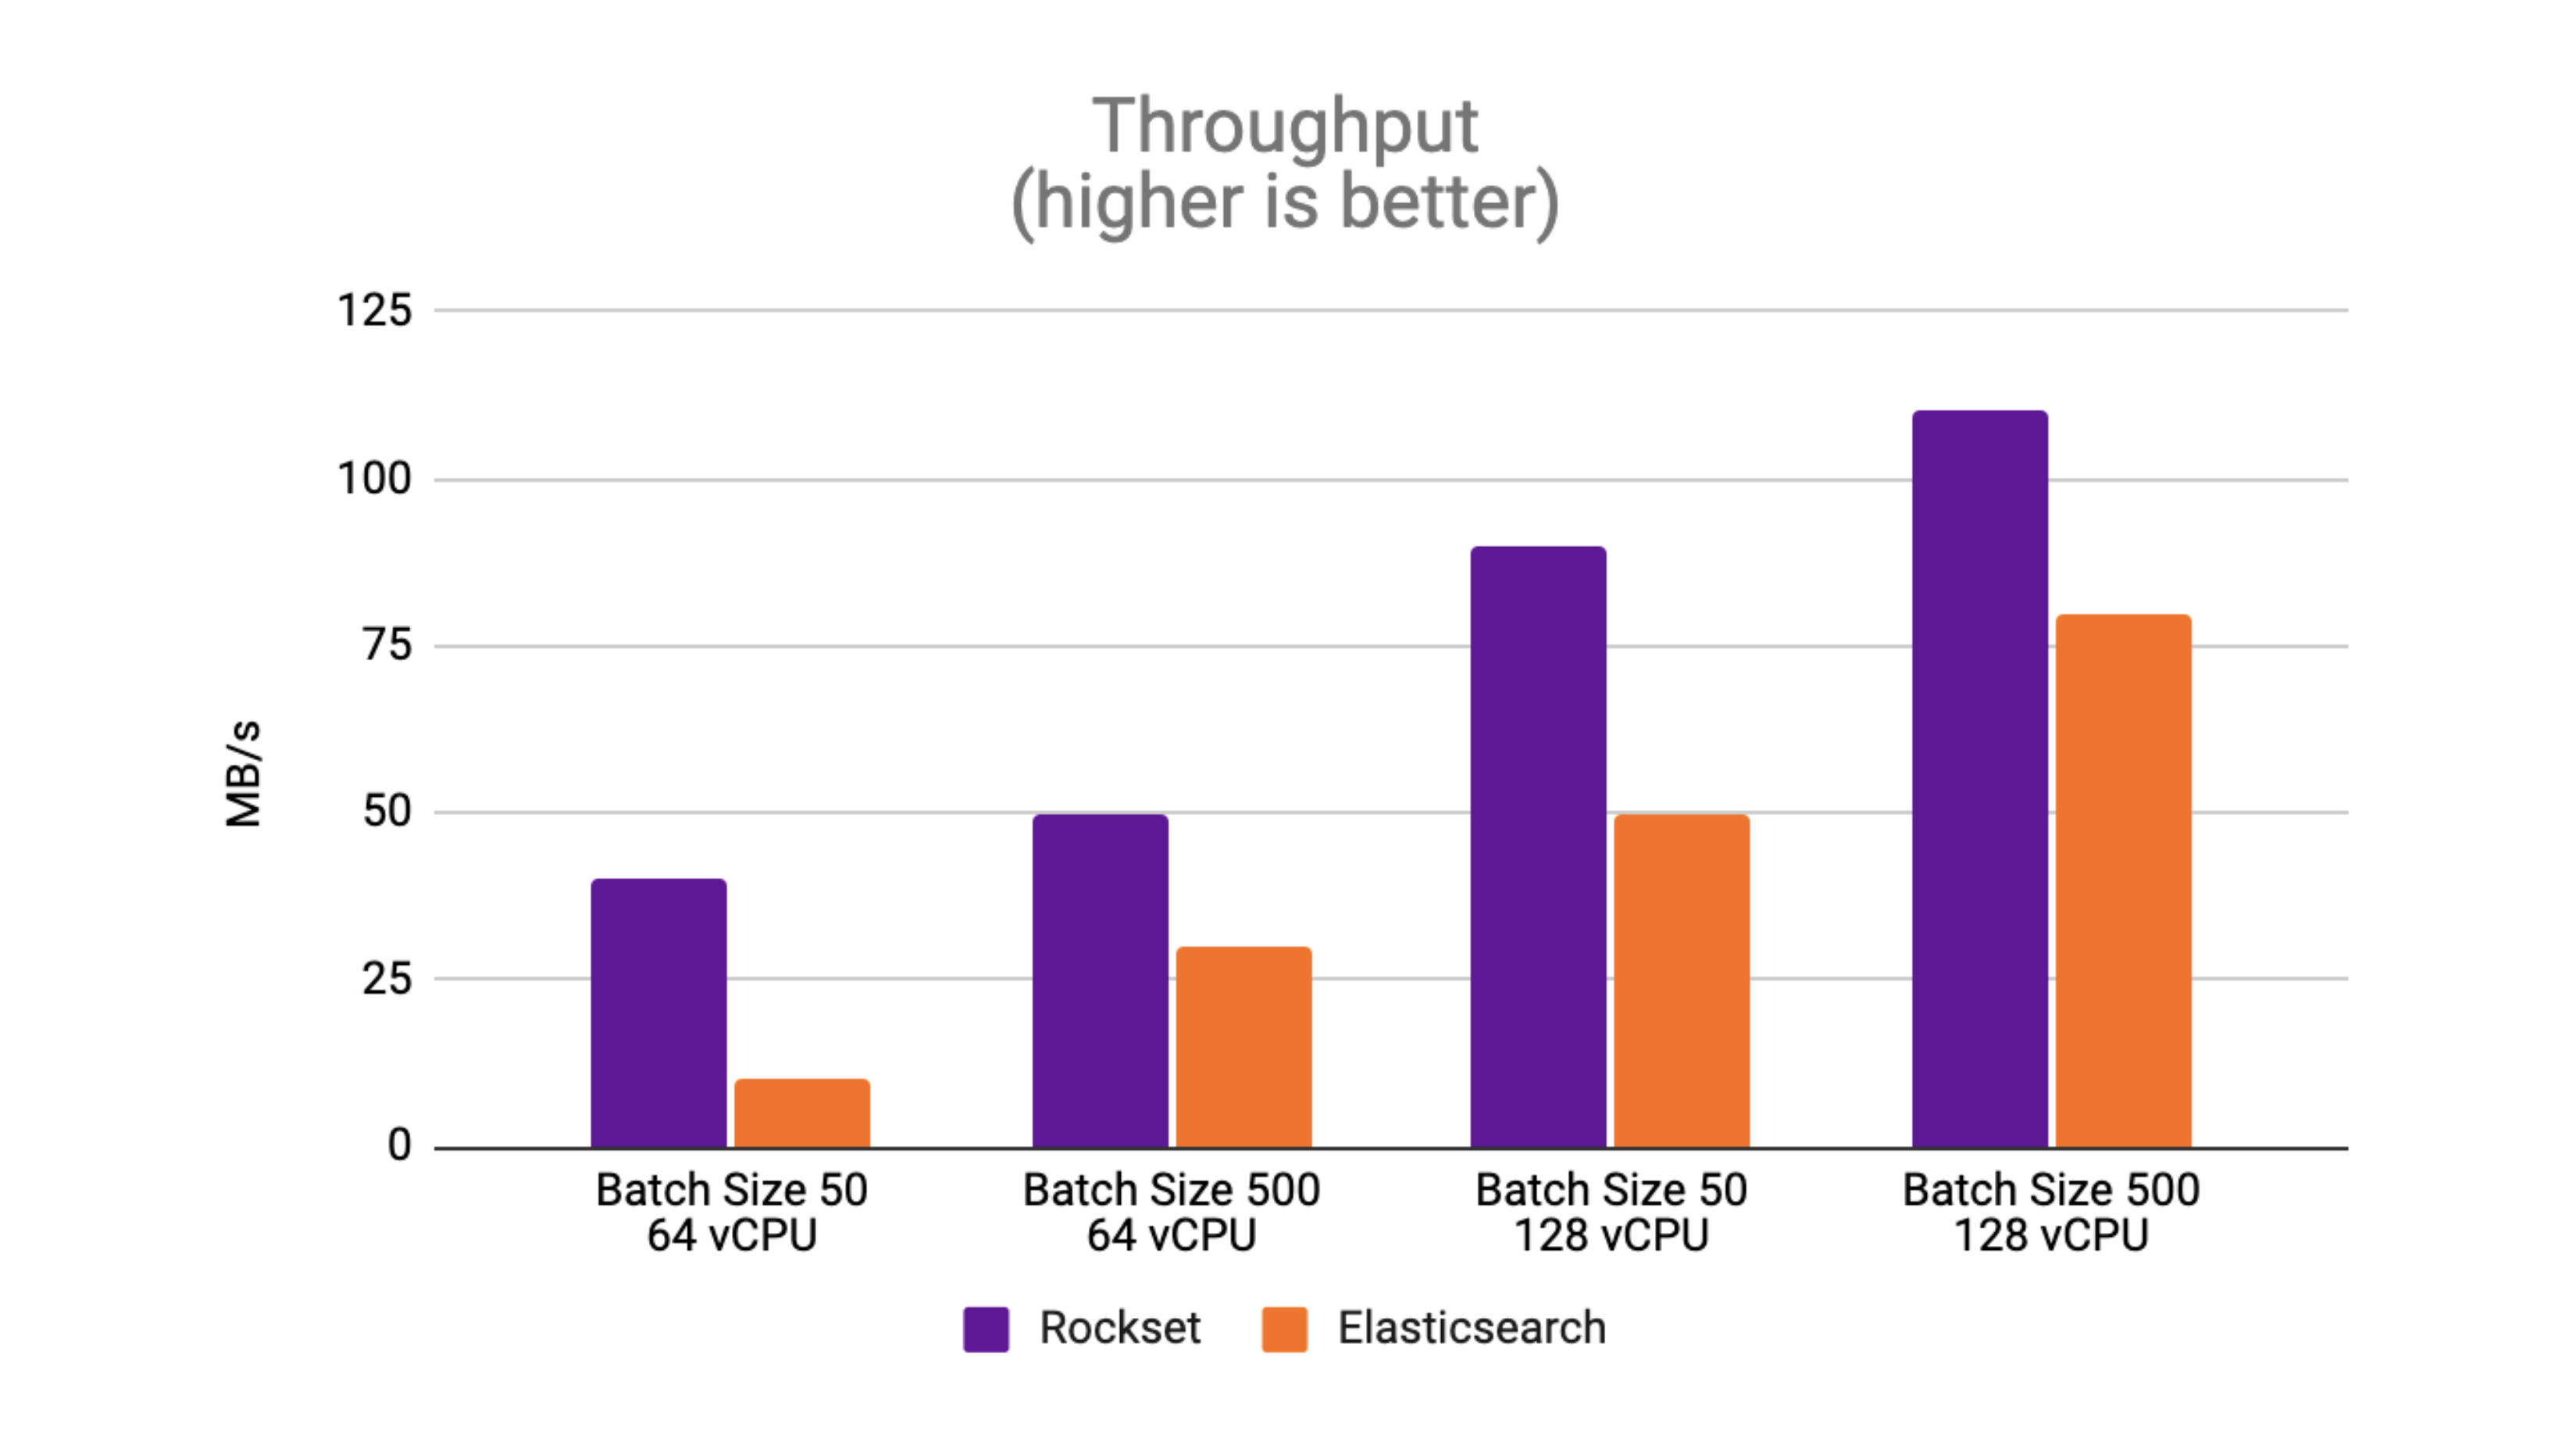 Graph of the peak throughput of Elasticsearch and Rockset using batches of 50 and 500. Databases were evaluated on 64 and 128 vCPU instances. Higher throughput indicates better performance.